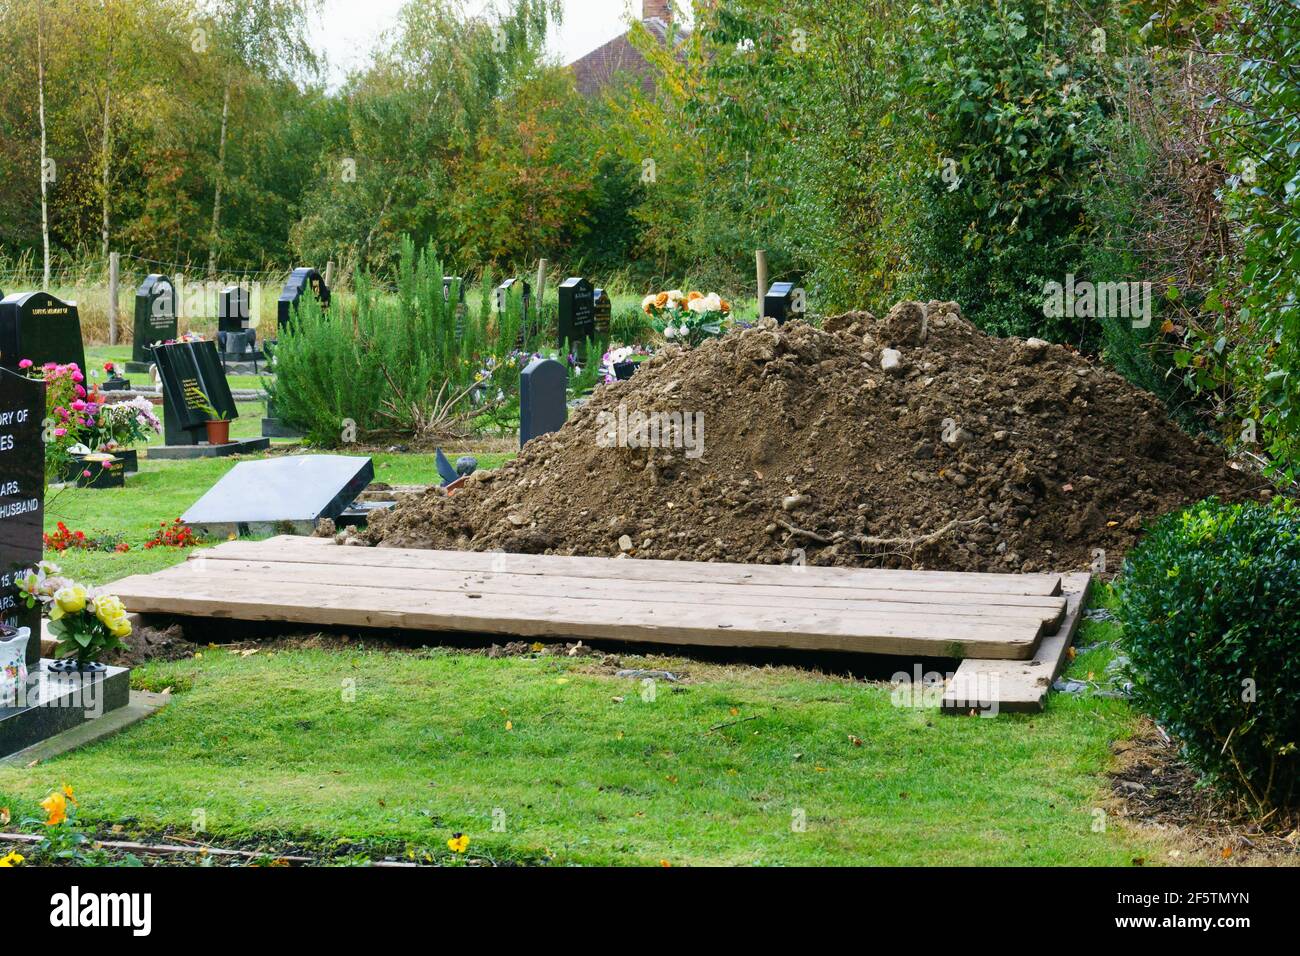 Newly dug grave in preparation for a funeral in a typical cemetery in the UK Stock Photo